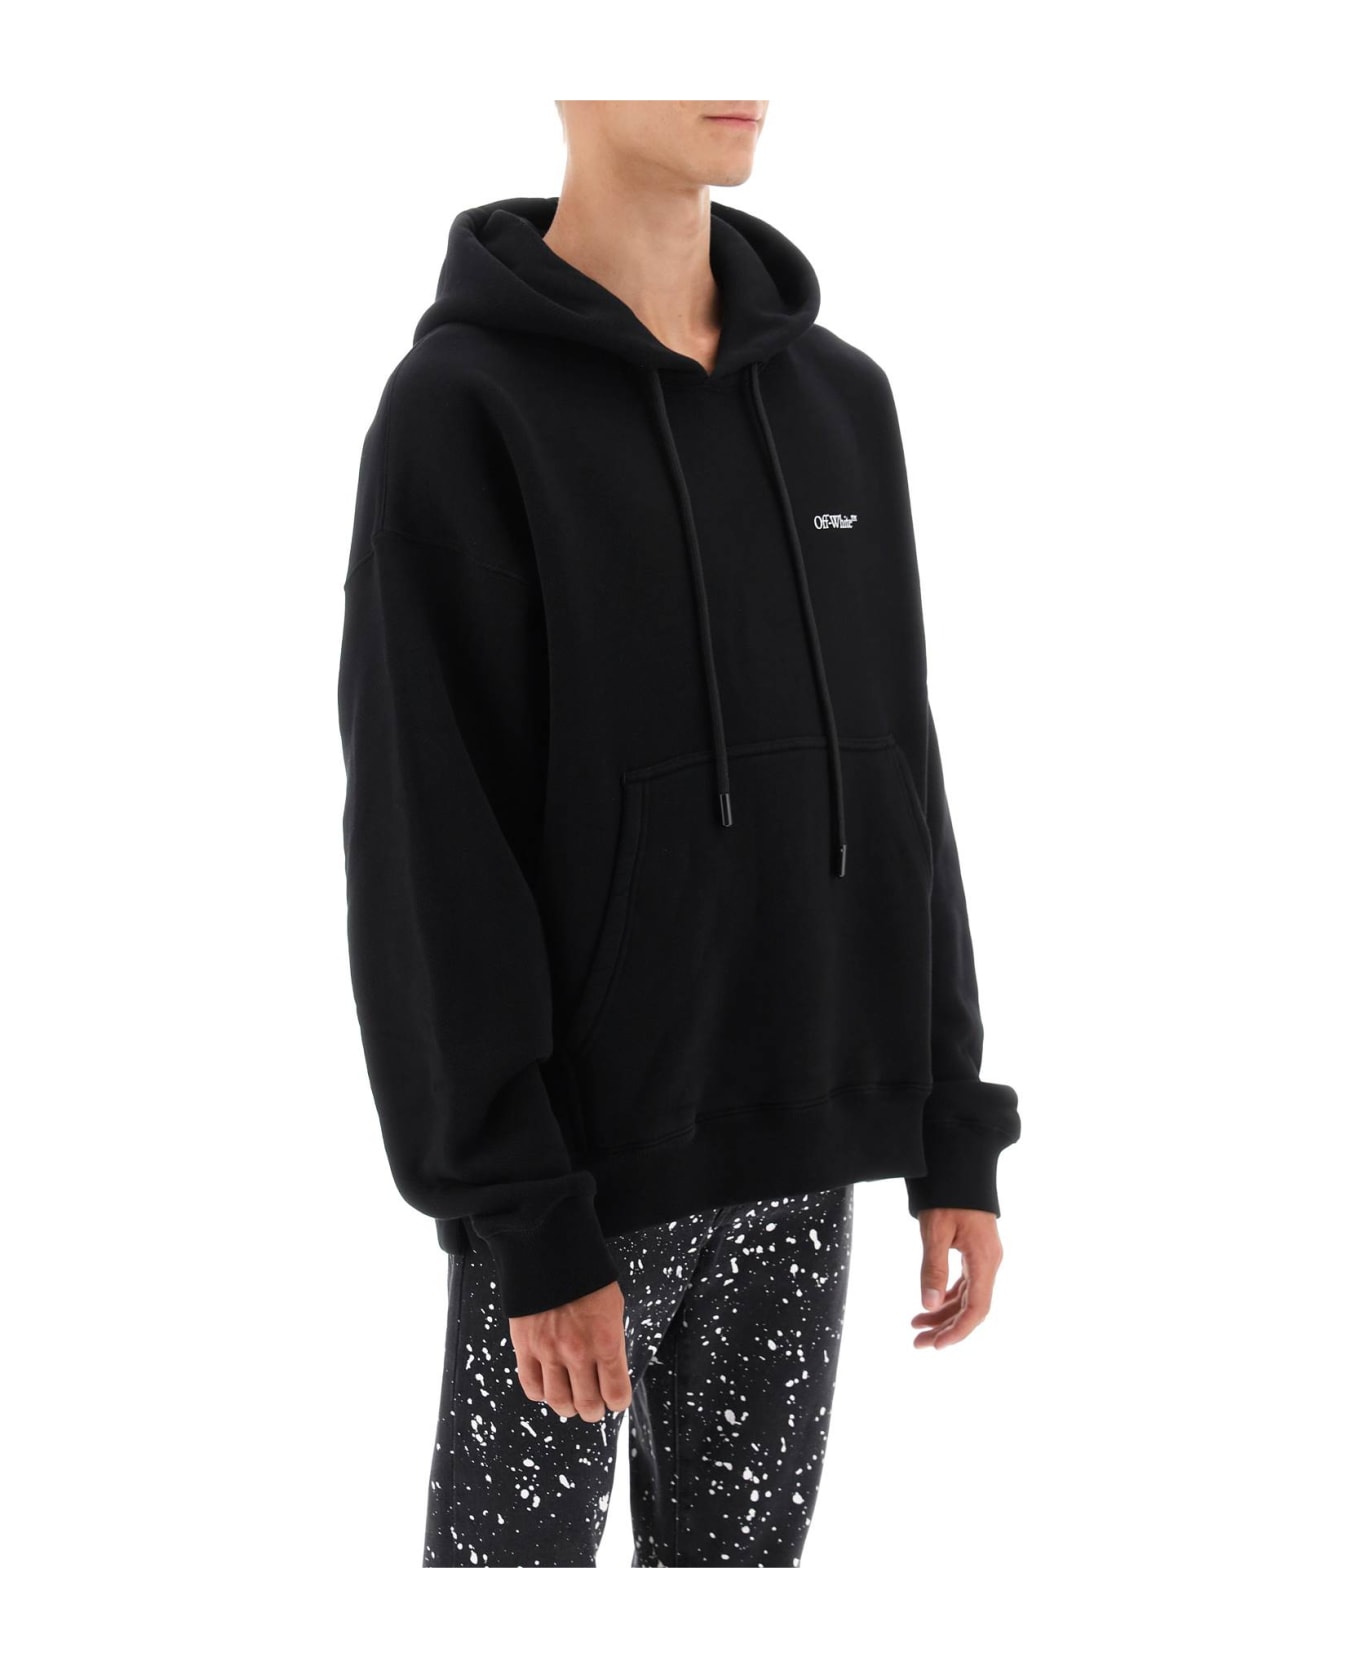 Off-White Hoodie With Back Arrow Print - black